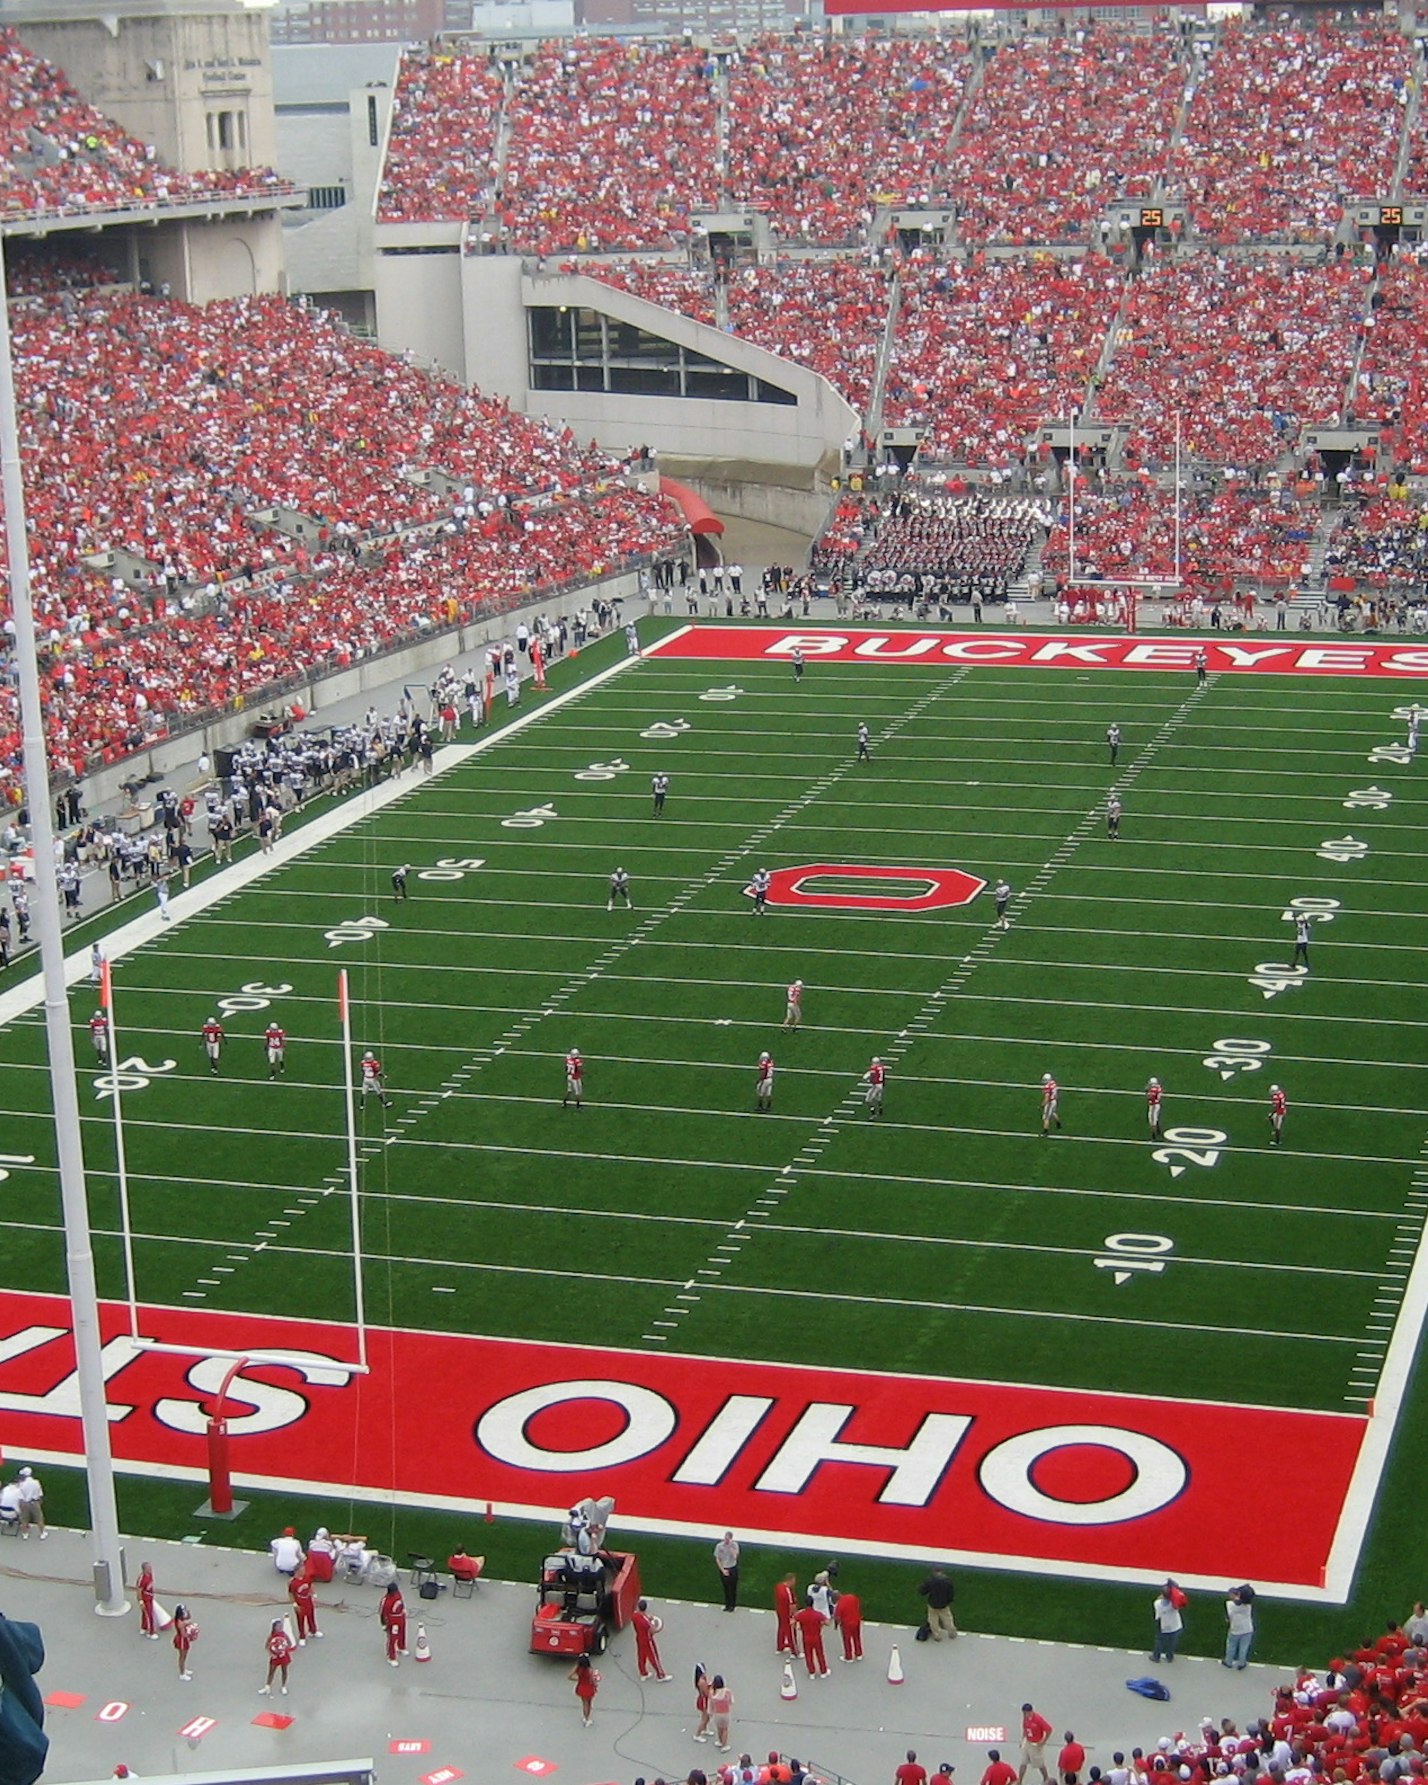 Football game at Ohio State